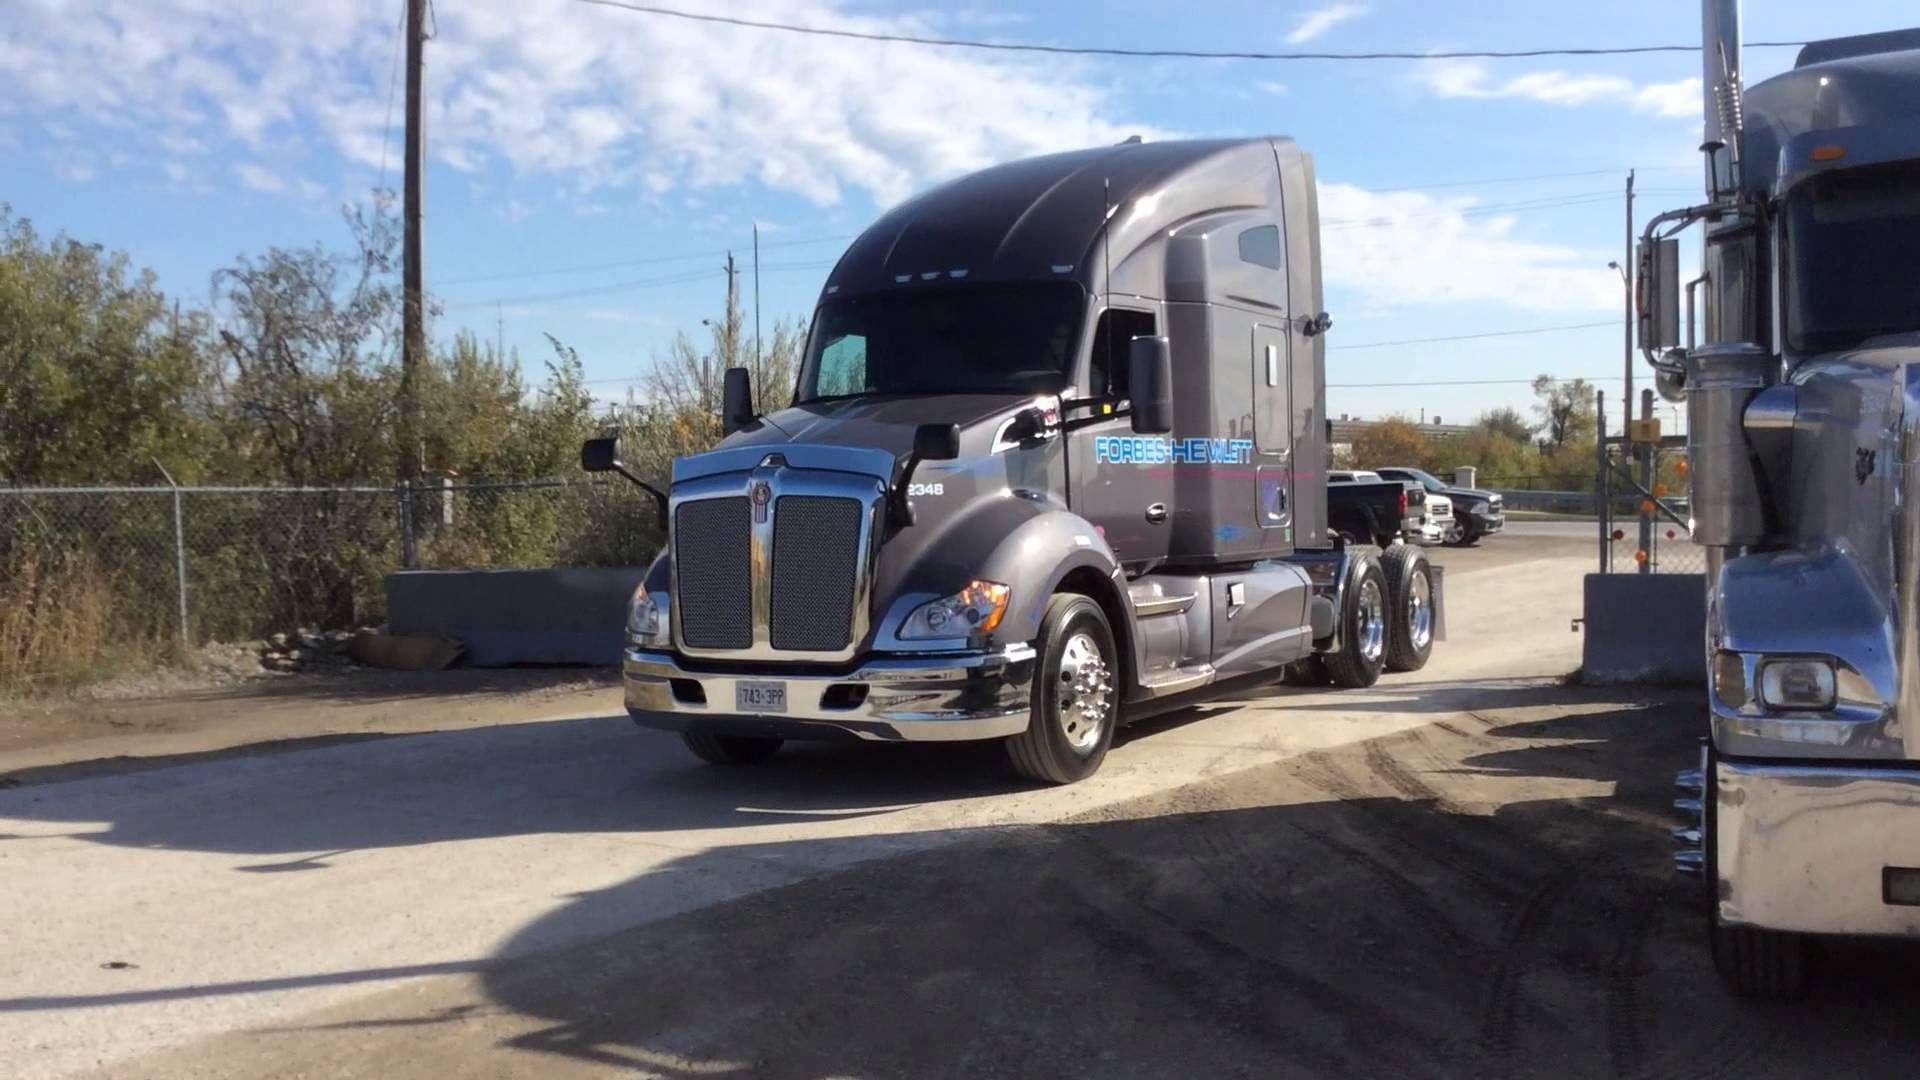 The New Forbes Hewlett Kenworth T680's Started To Arrive At The Yard